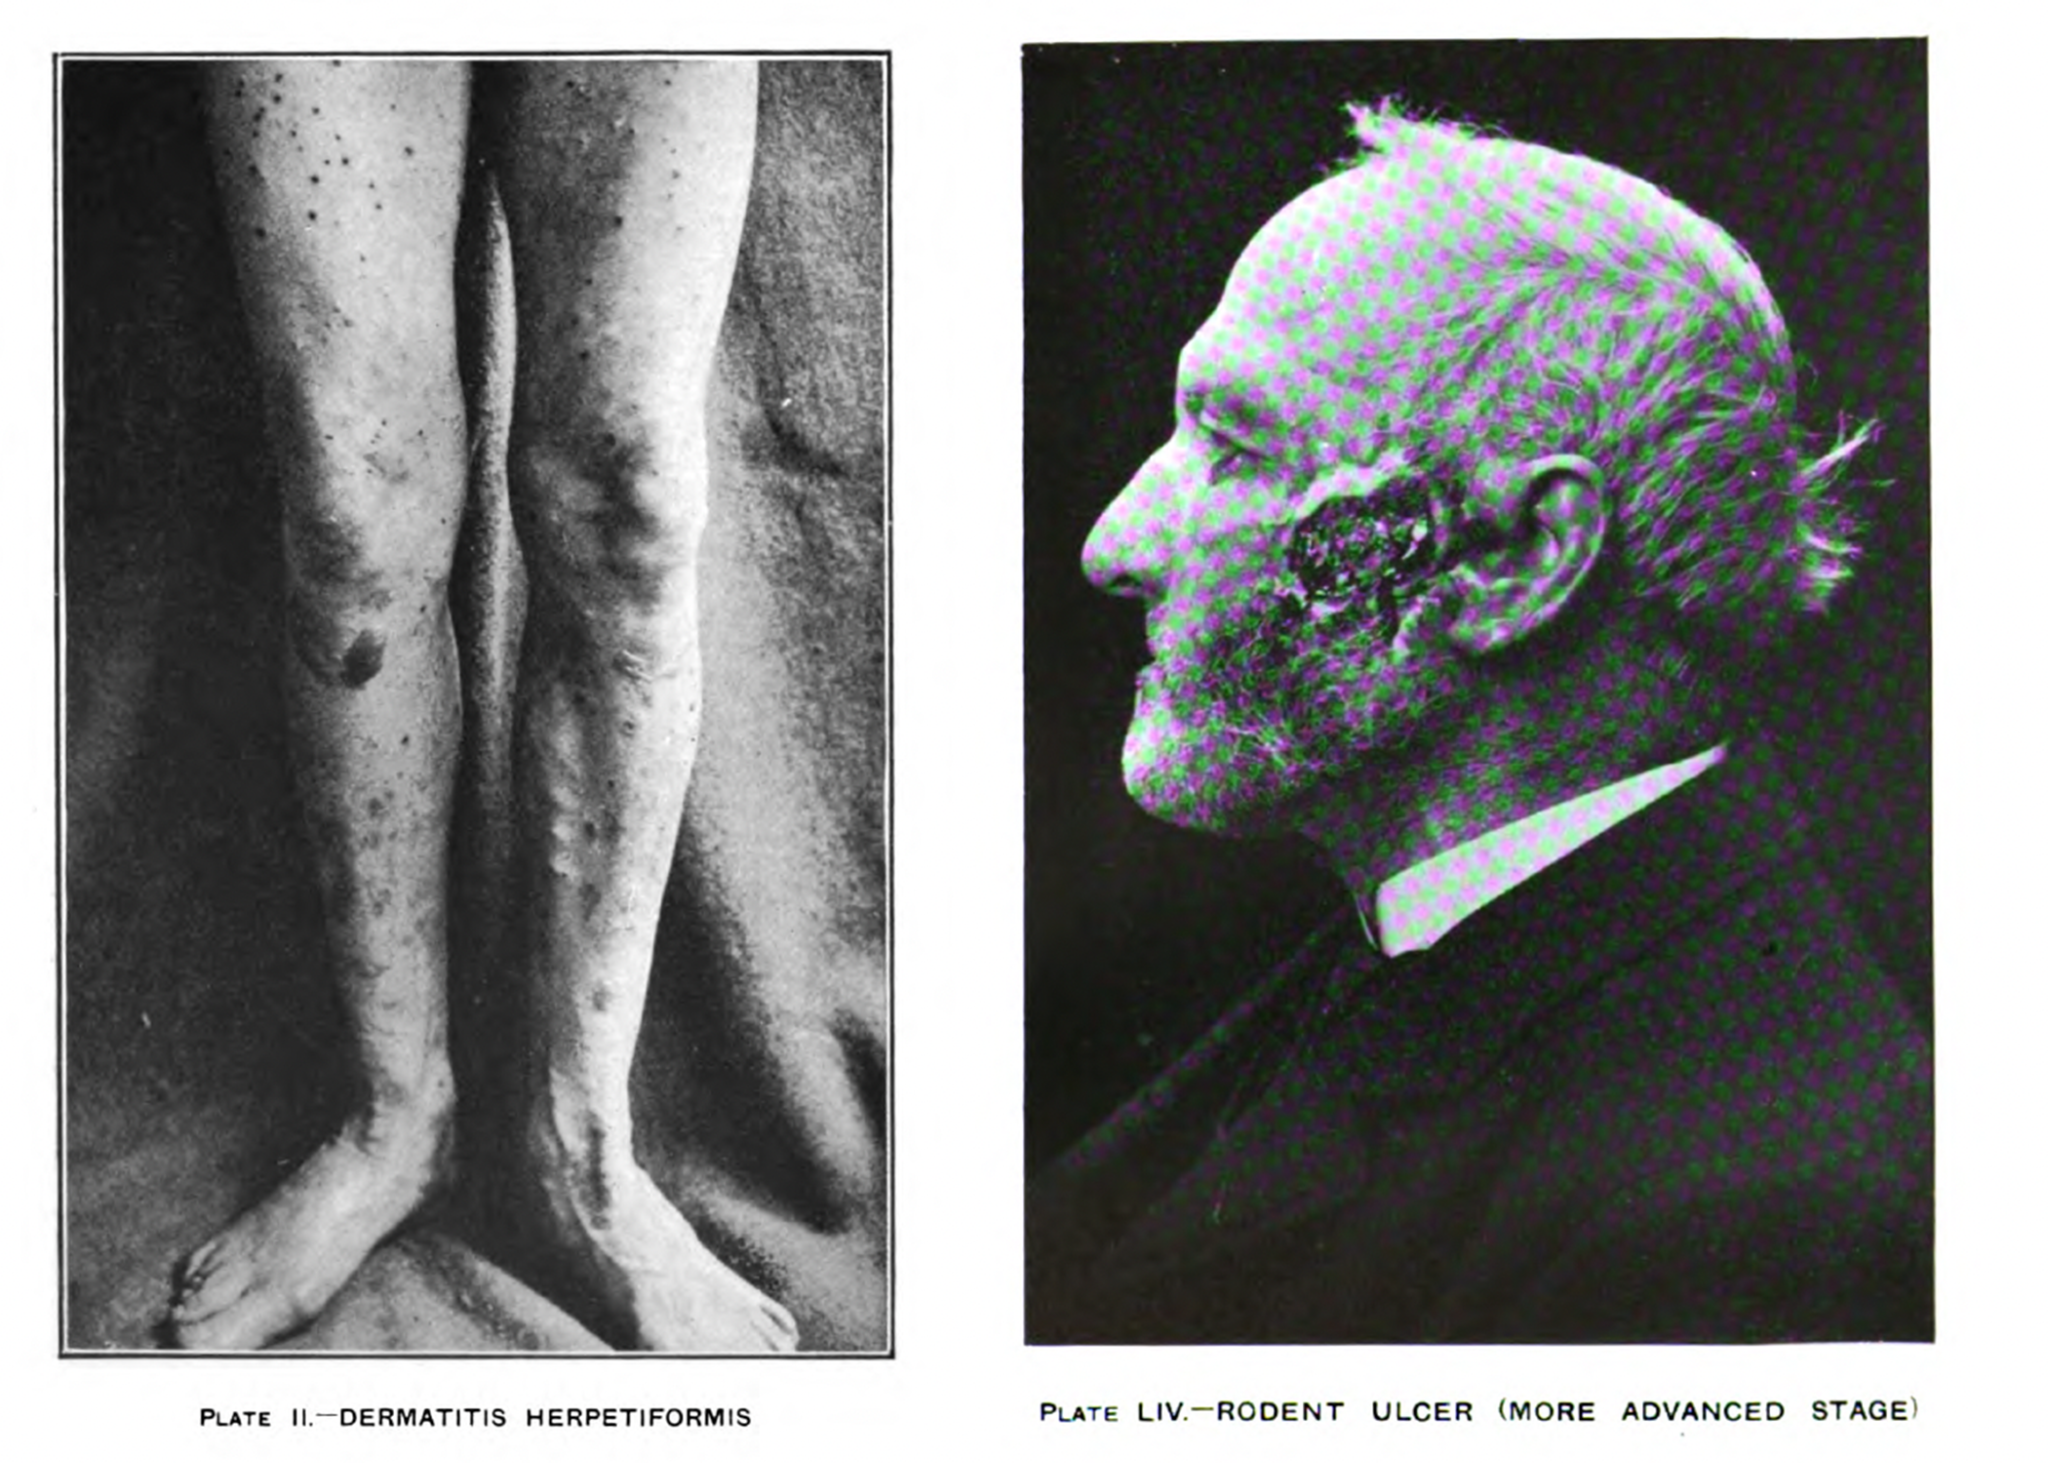 Purcell Fig. 4. Two images from Sir. Malcolm Morris’ Diseases of the Skin (1909). The left plate displays a visual rhetoric of anatomizing the photographic subject by cutting and framing their body to display the disease in isolation. The right plate displays a more general image where some identifying aspects of the sitter are made viewable. 